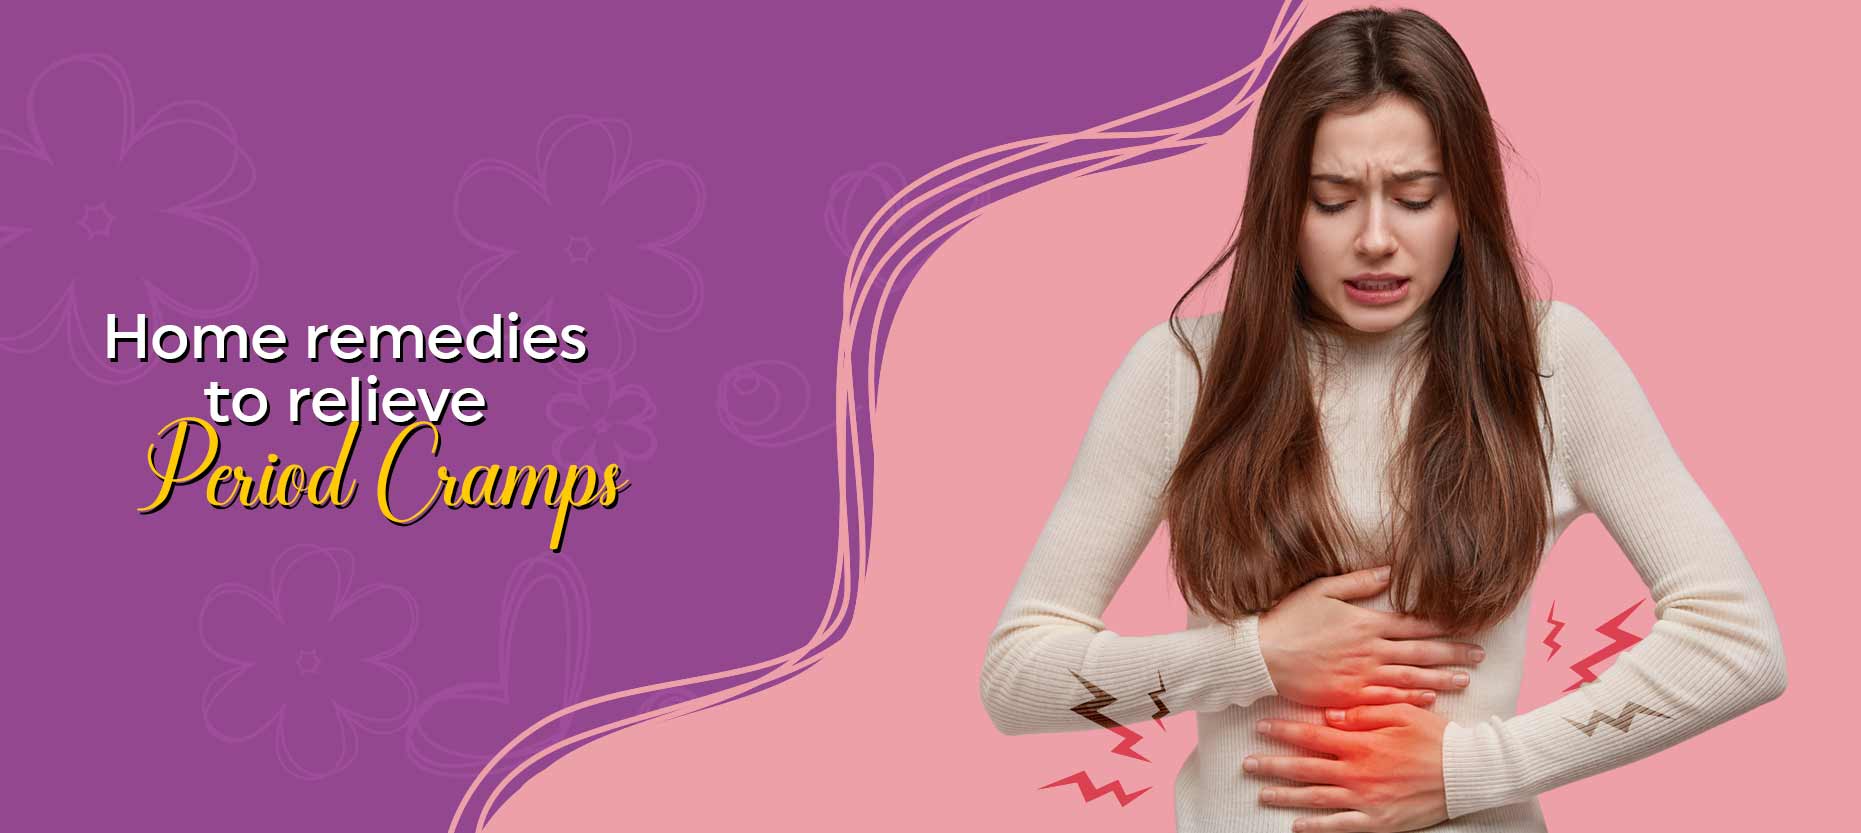 Home remedies to relieve period cramps